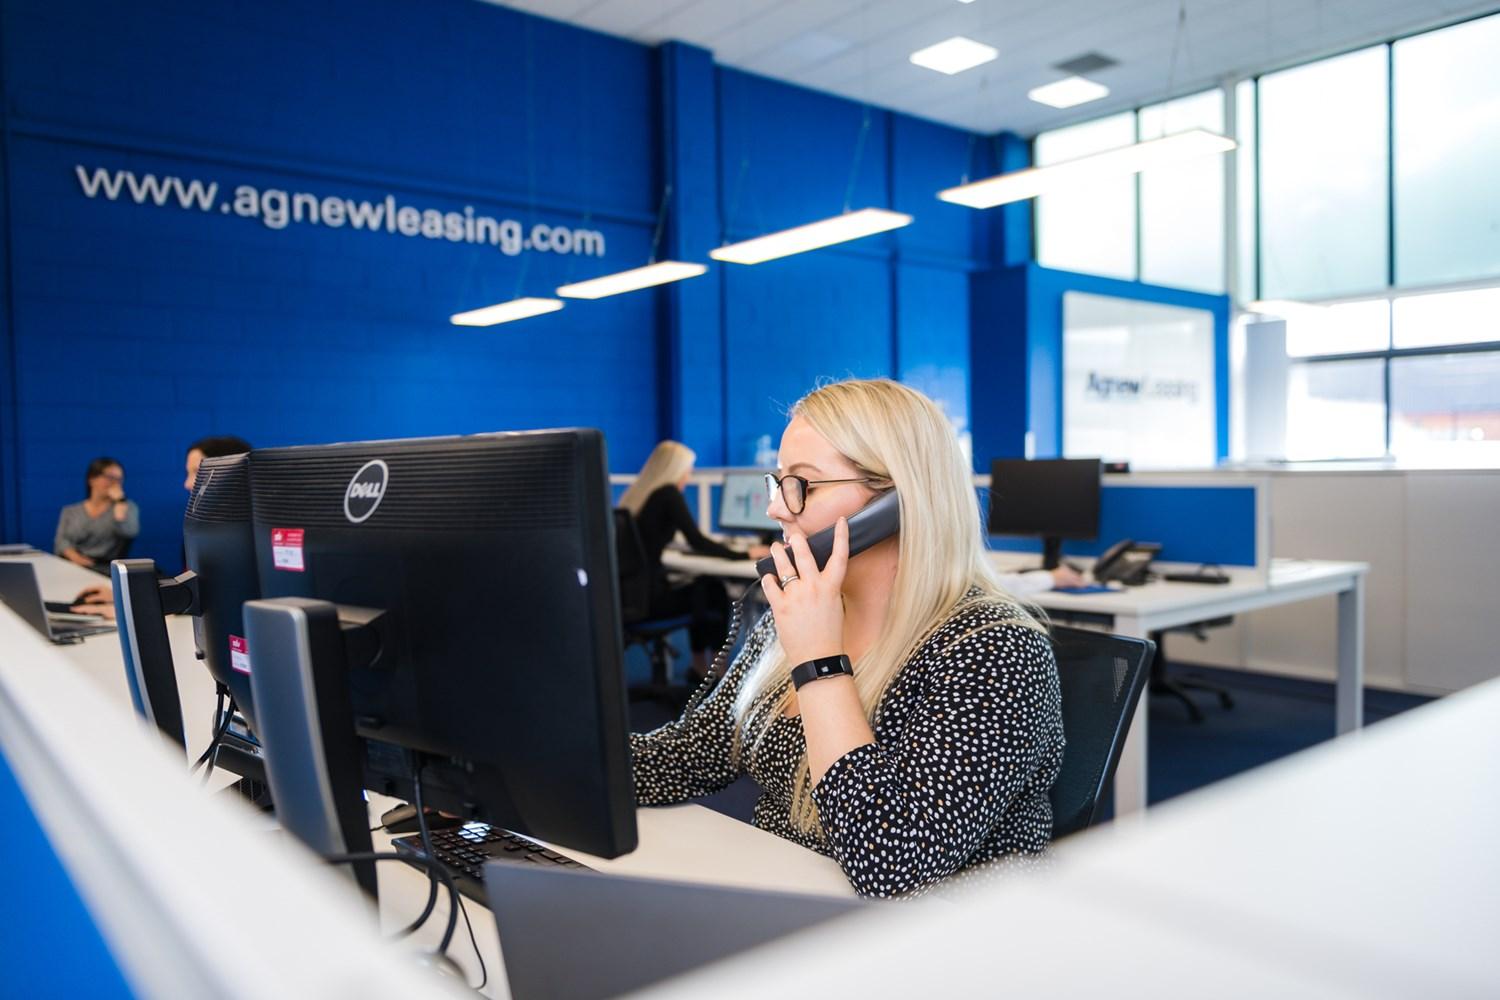 Agnew Leasing staff dealing with Affinity Car Scheme enquiries